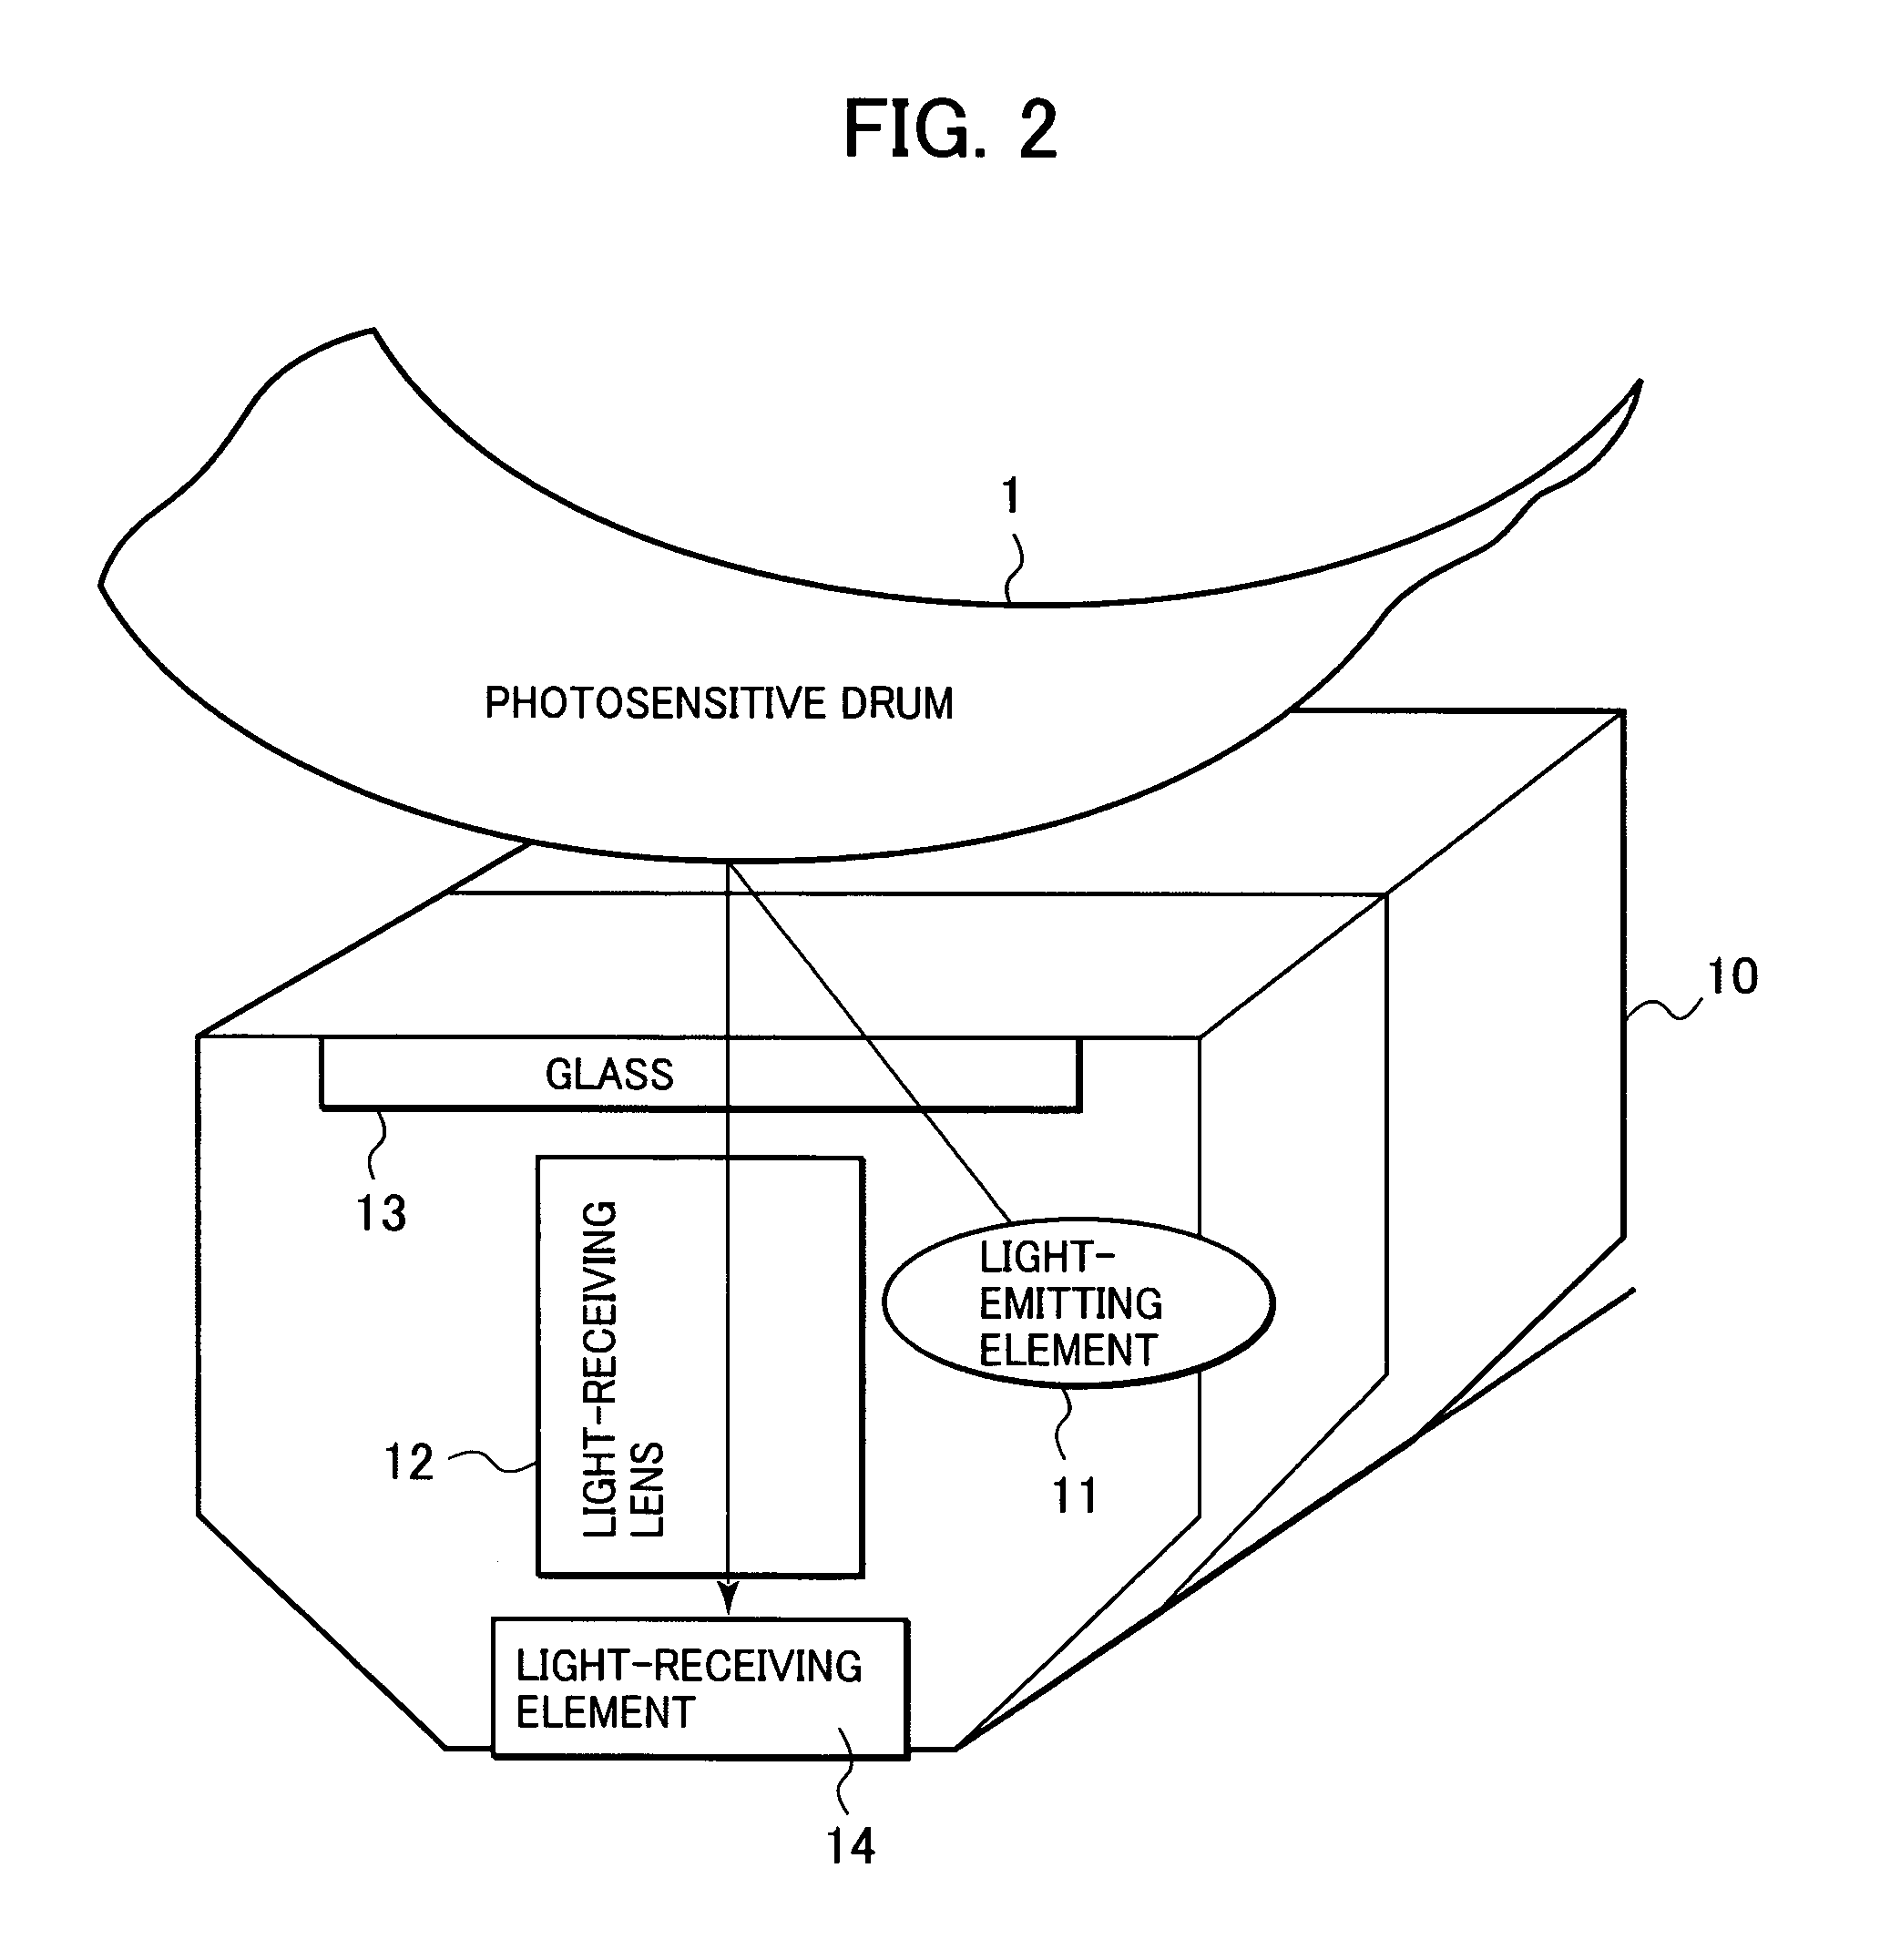 Image forming apparatus with a toner image density feature and related method